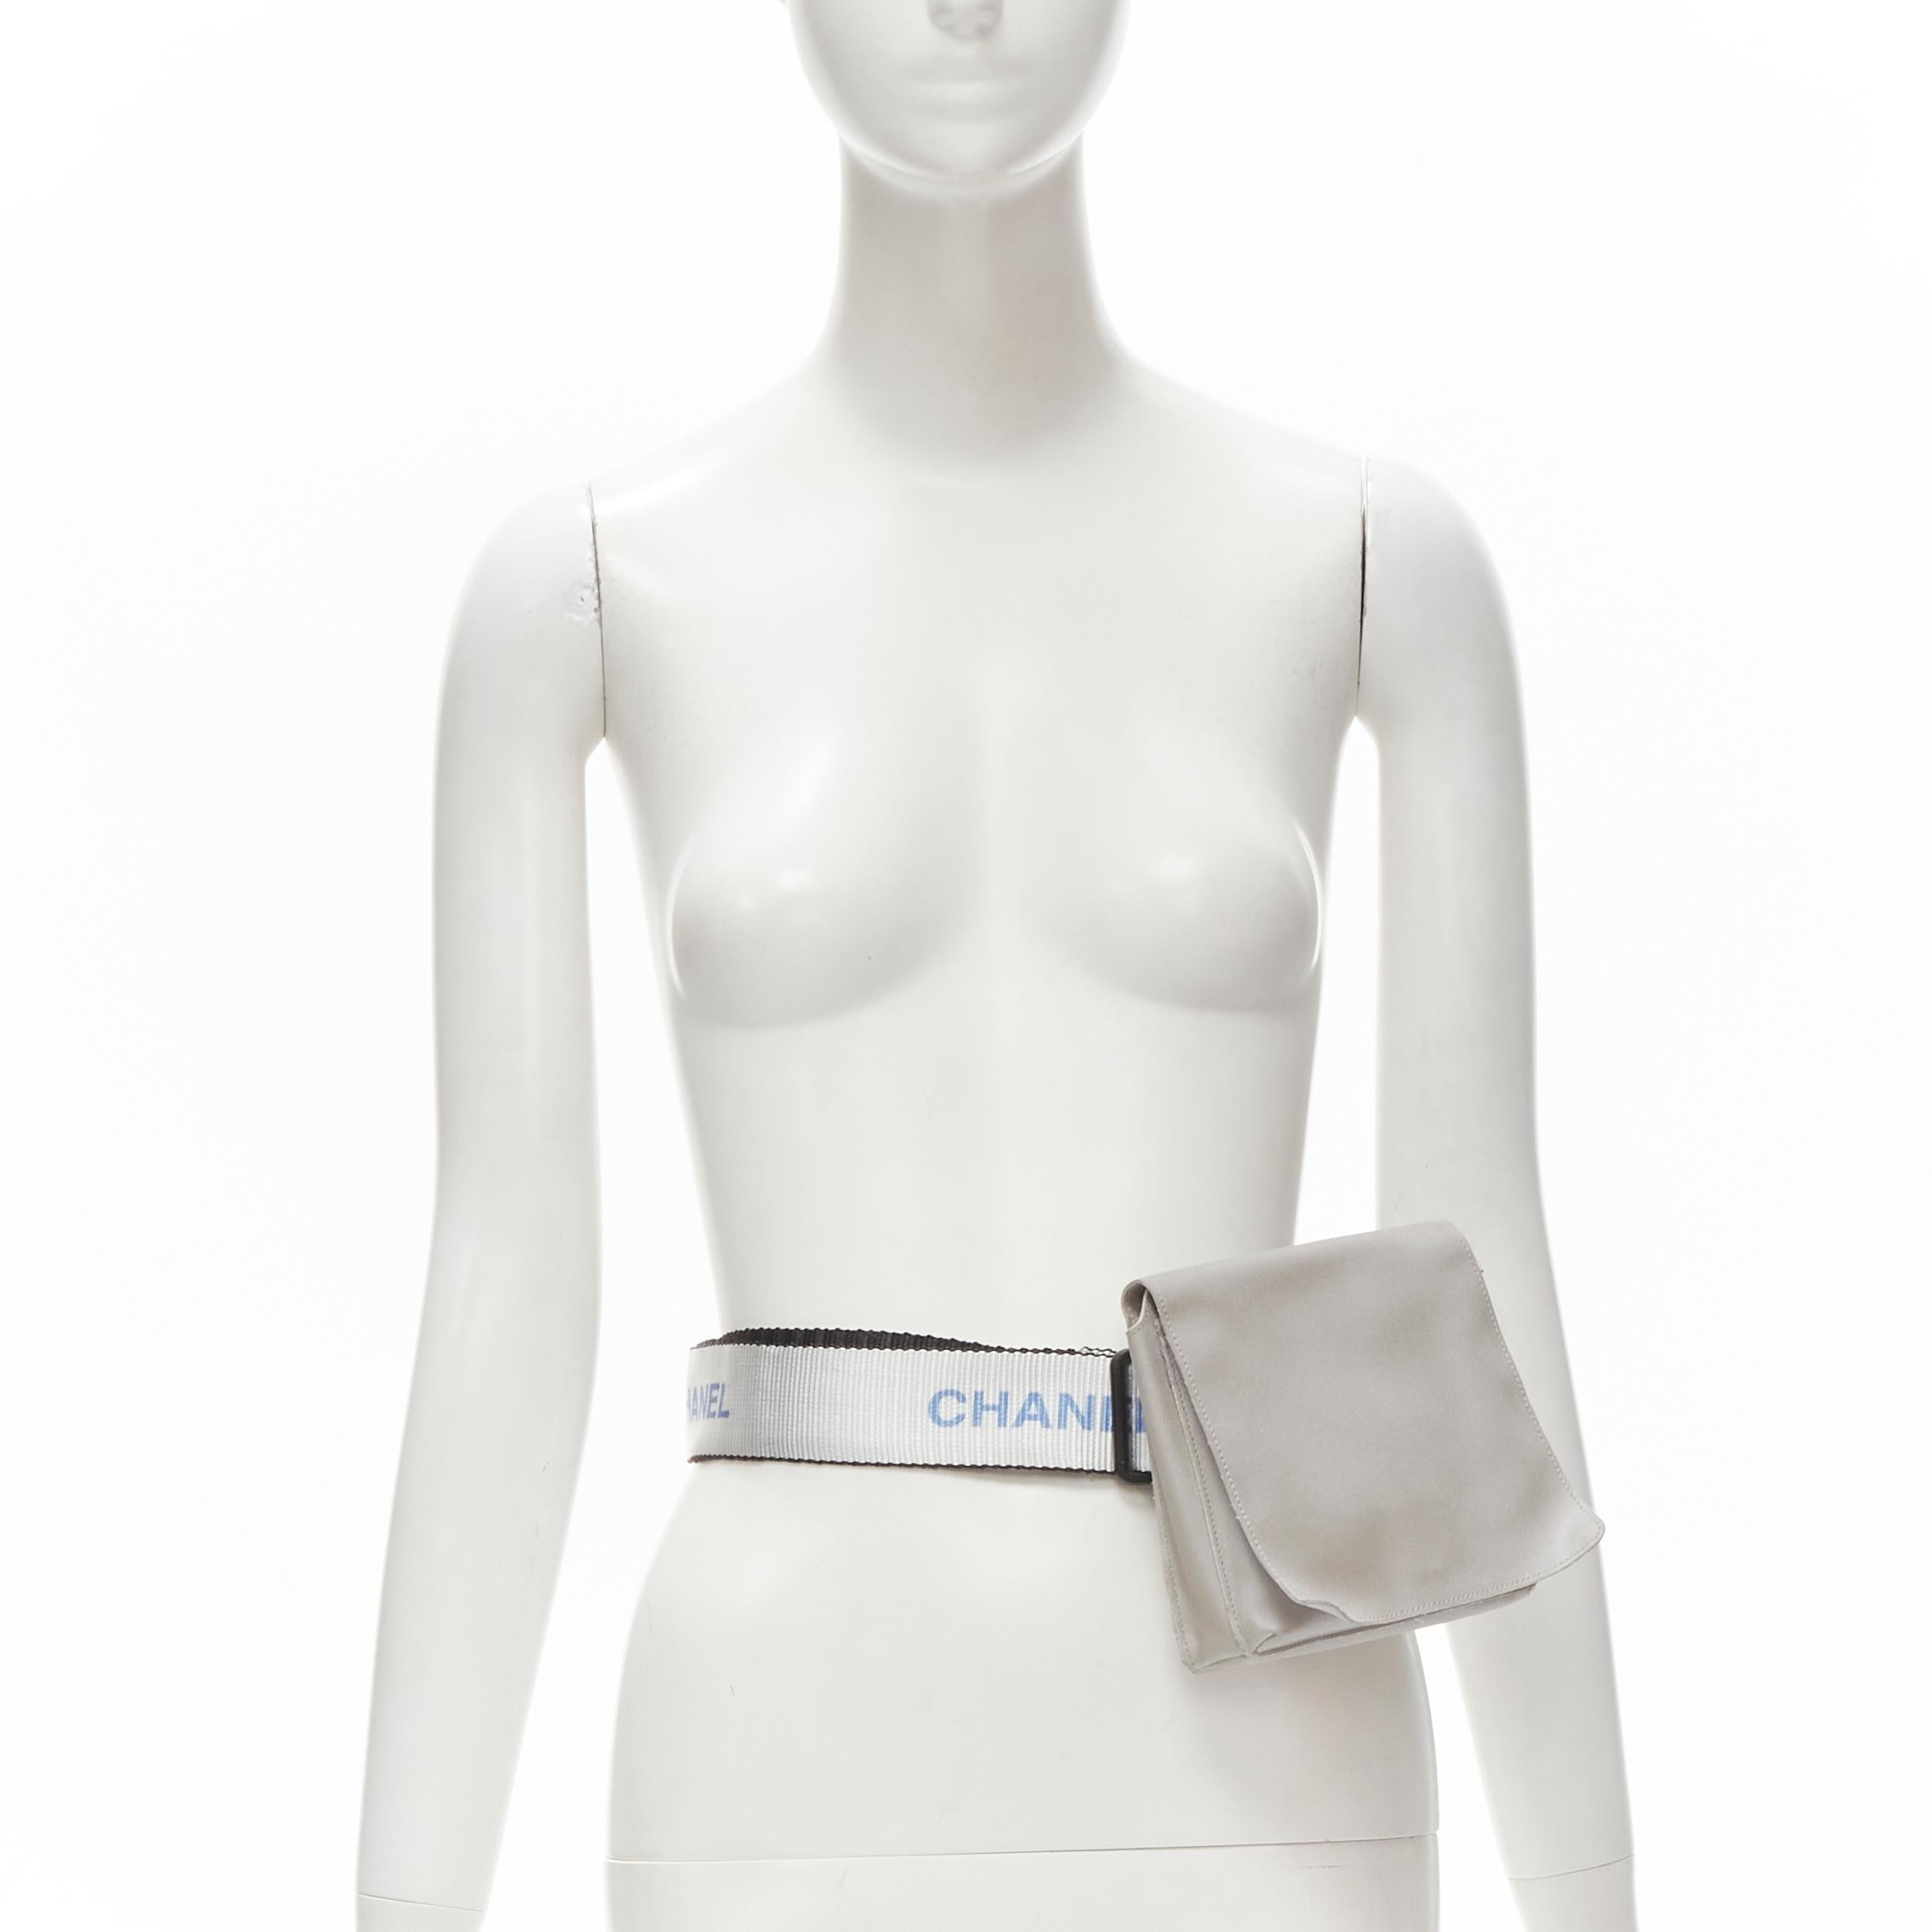 CHANEL 1990's Vintage silver nylon logo strap CC buckle square flap waist bag 
Reference: ANWU/A00038 
Brand: Chanel
Designer: Karl Lagerfeld 
Model: Nylon 
Collection: 1997-1999 
Material: Nylon 
Color: Silver 
Pattern: Solid
Closure: Buckle 
Extra